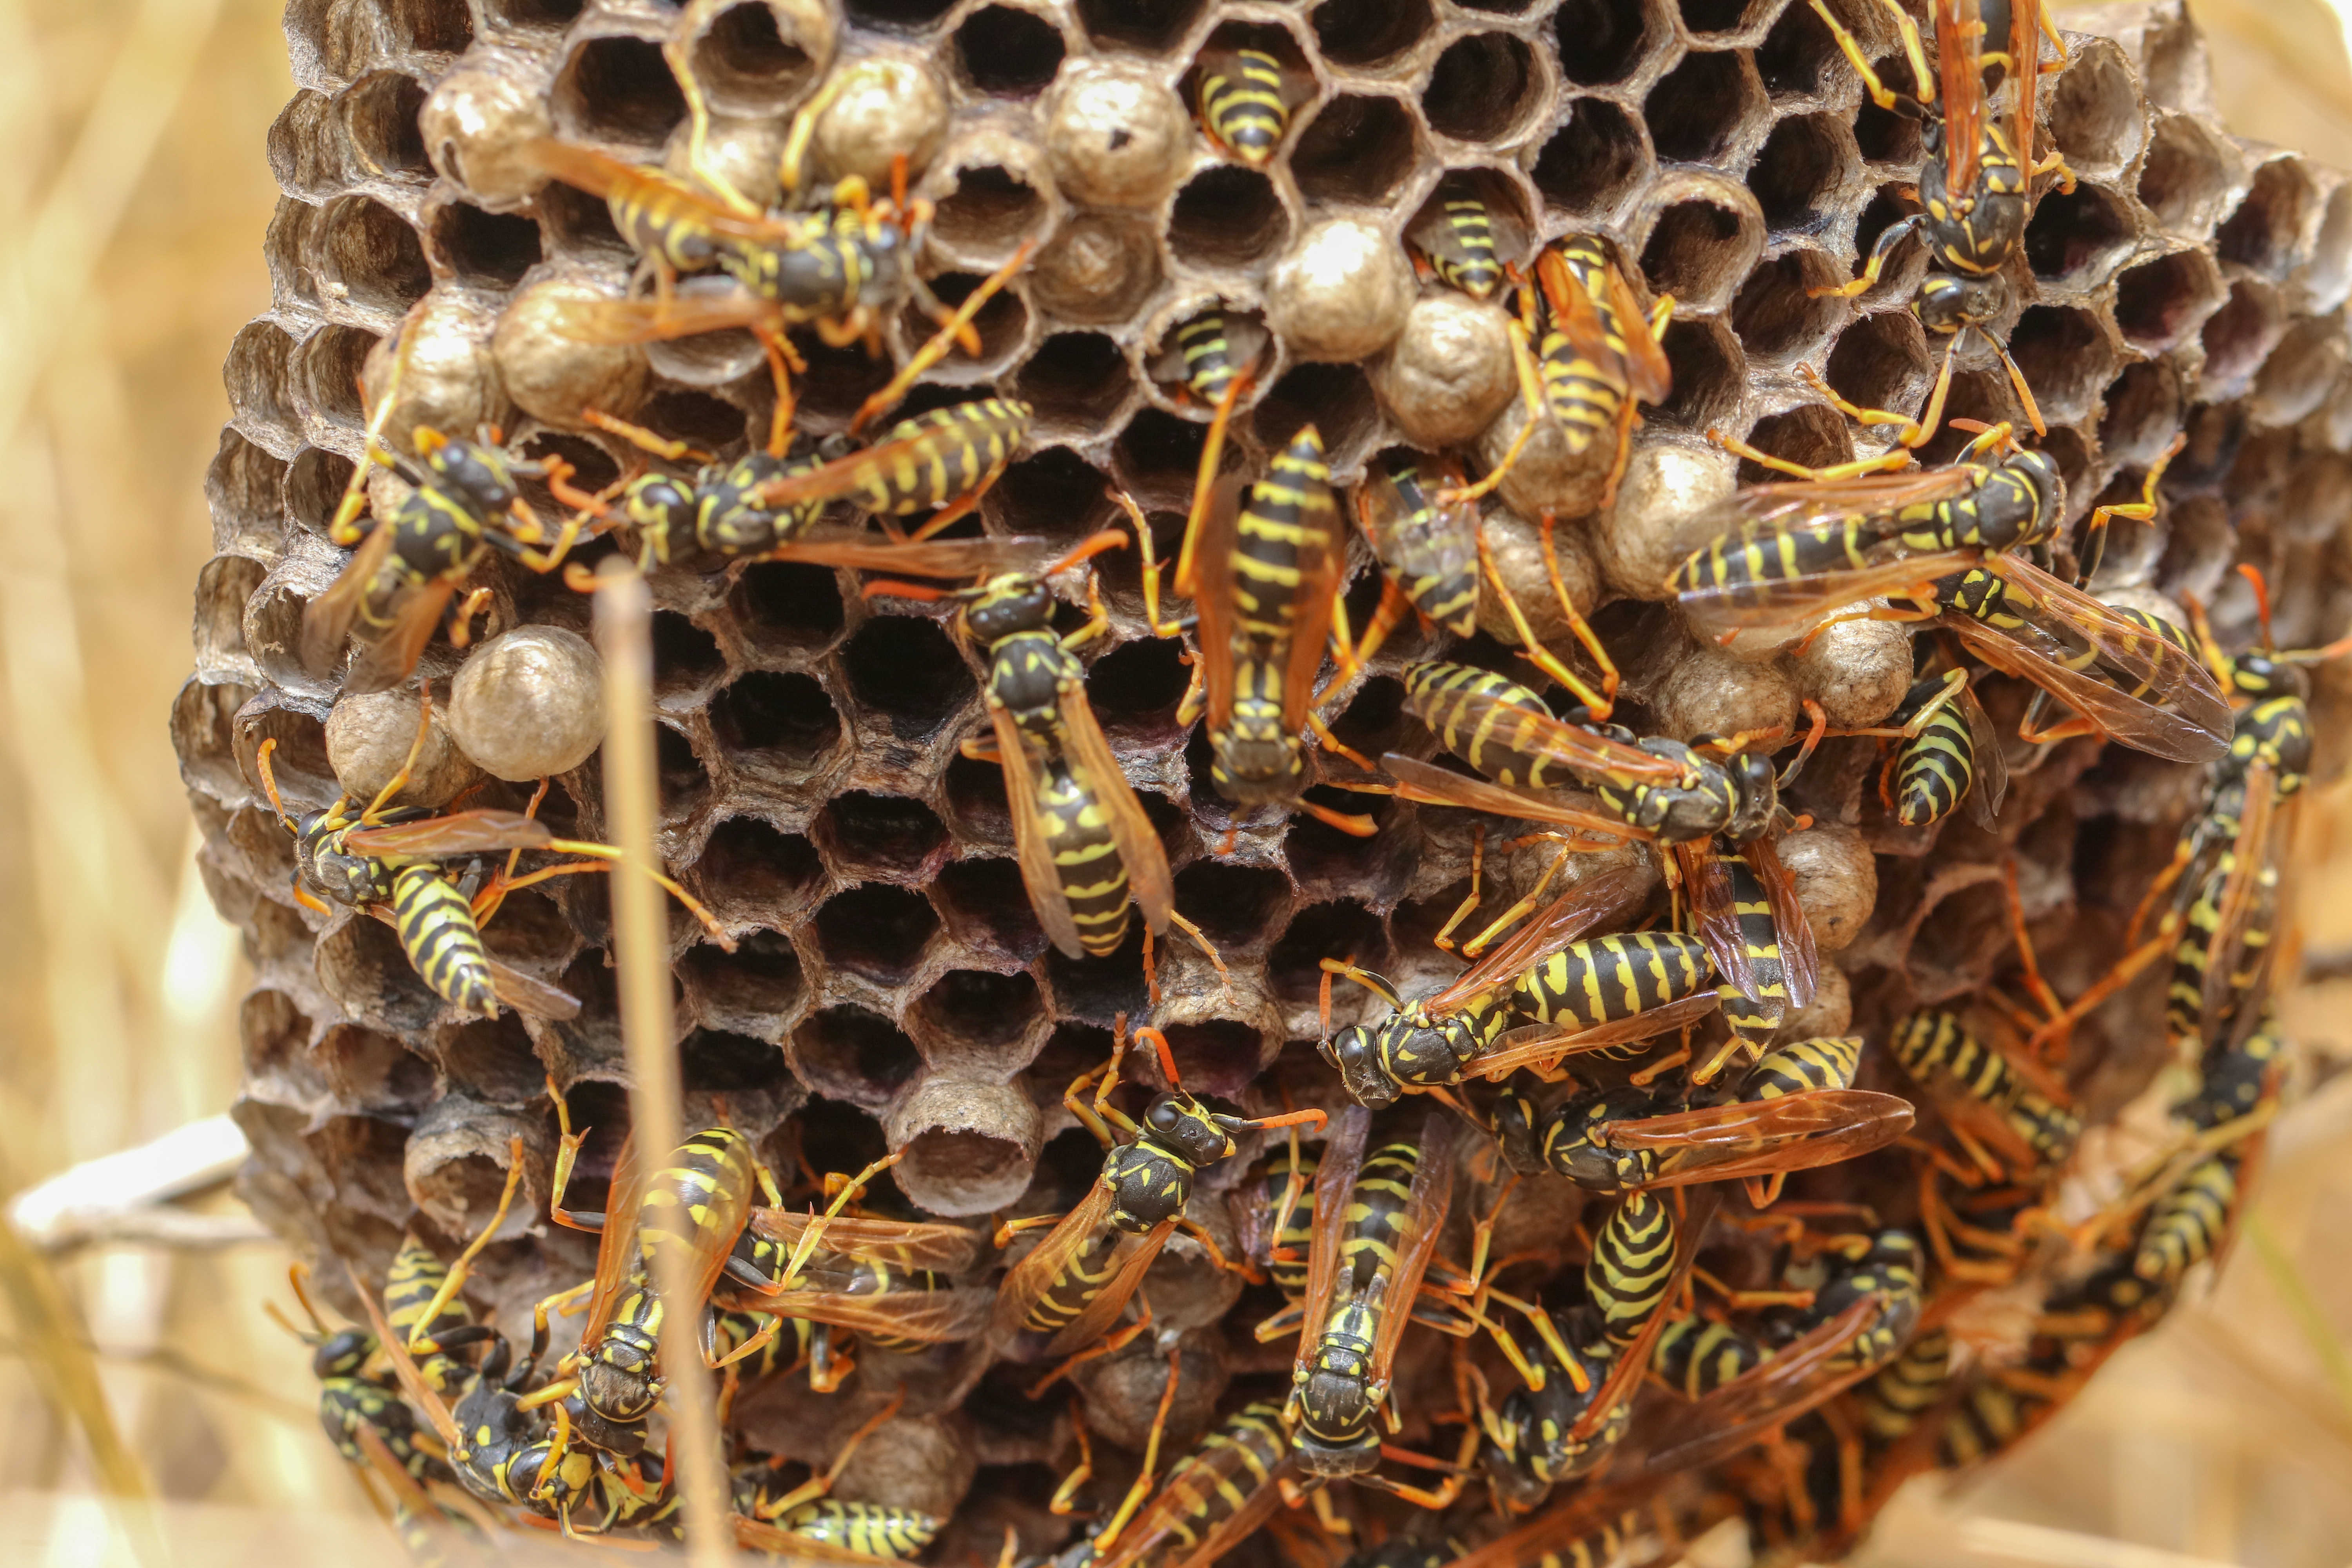 A hornets nests - learn how GGA Pest Management Hillsboro can help with our hornet pest control services.